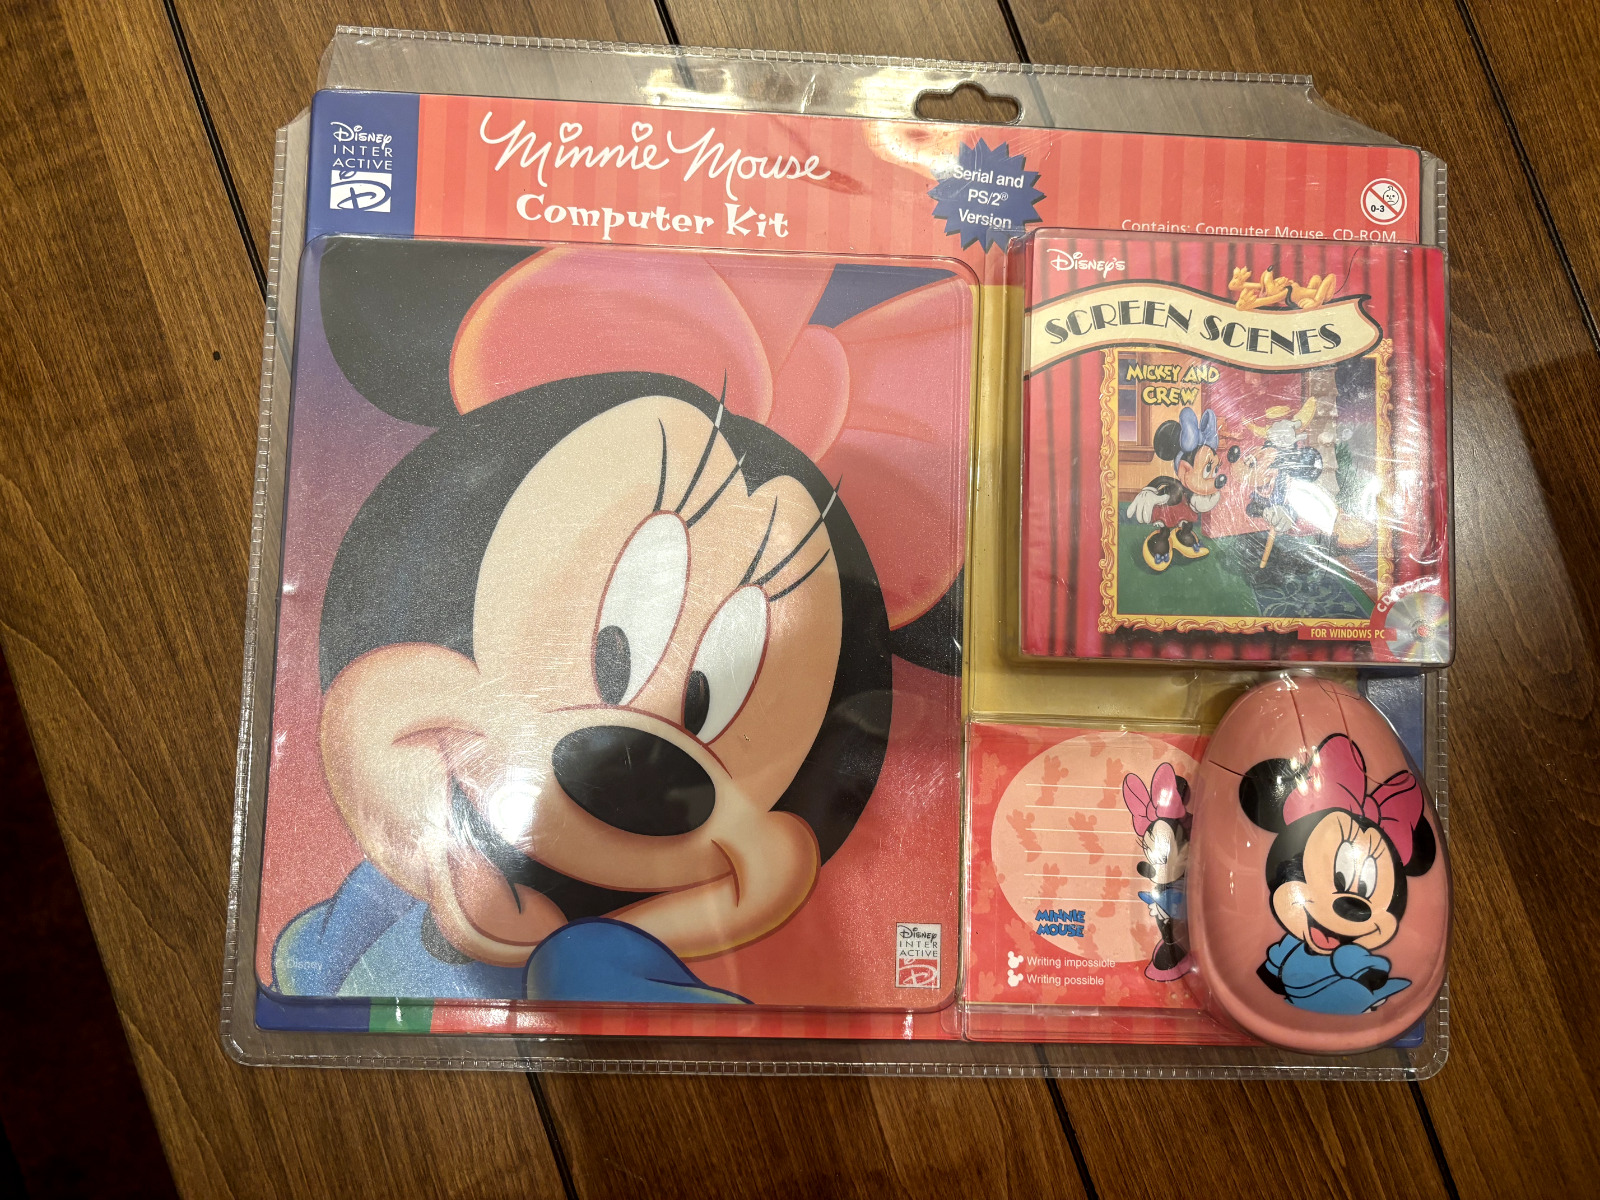 Disney Interactive *Minnie Mouse* PC Computer Kit [CD-ROM, Mouse & Pad]